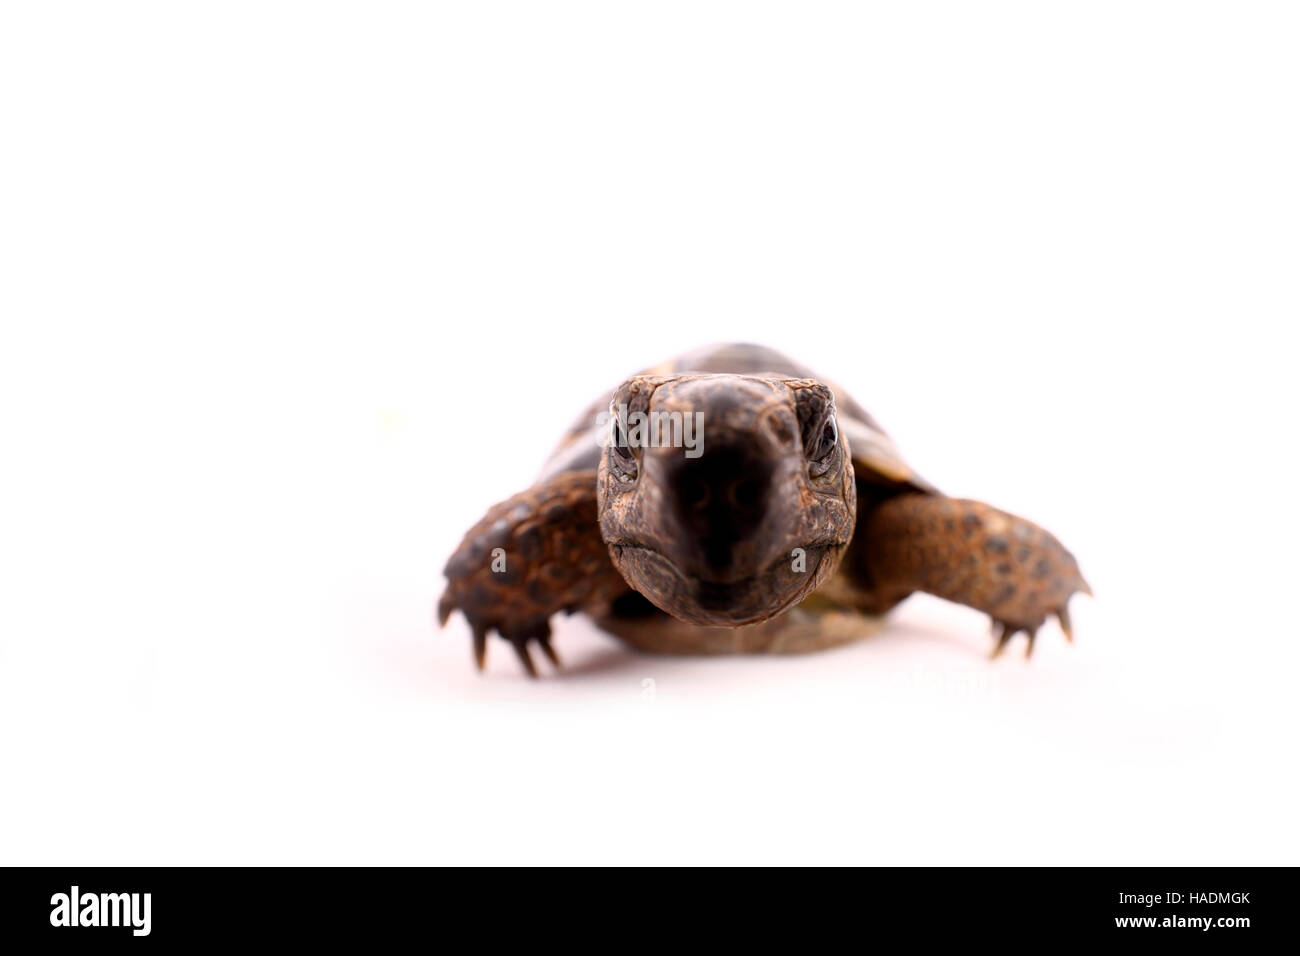 Mediterranean Spur-thighed Tortoise, Greek Tortoise (Testudo graeca). Adult, seen head-on. Studio picture against a white background. Germany Stock Photo